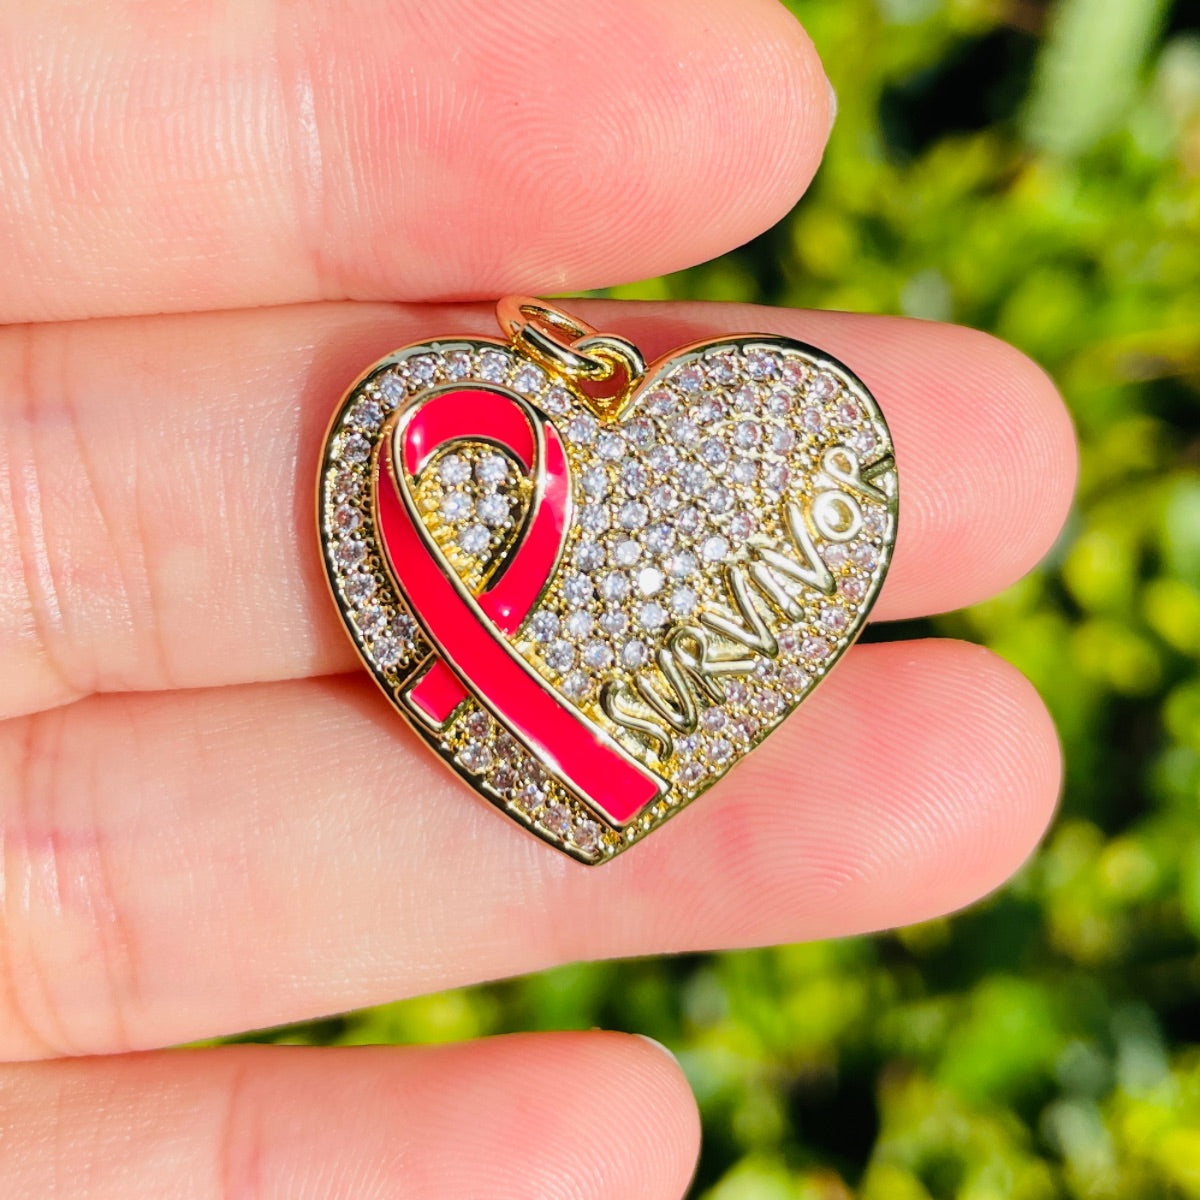 10pcs/lot CZ Pave Pink Ribbon Heart Survivor Word Charms - Breast Cancer Awareness Gold CZ Paved Charms Breast Cancer Awareness Hearts New Charms Arrivals Charms Beads Beyond